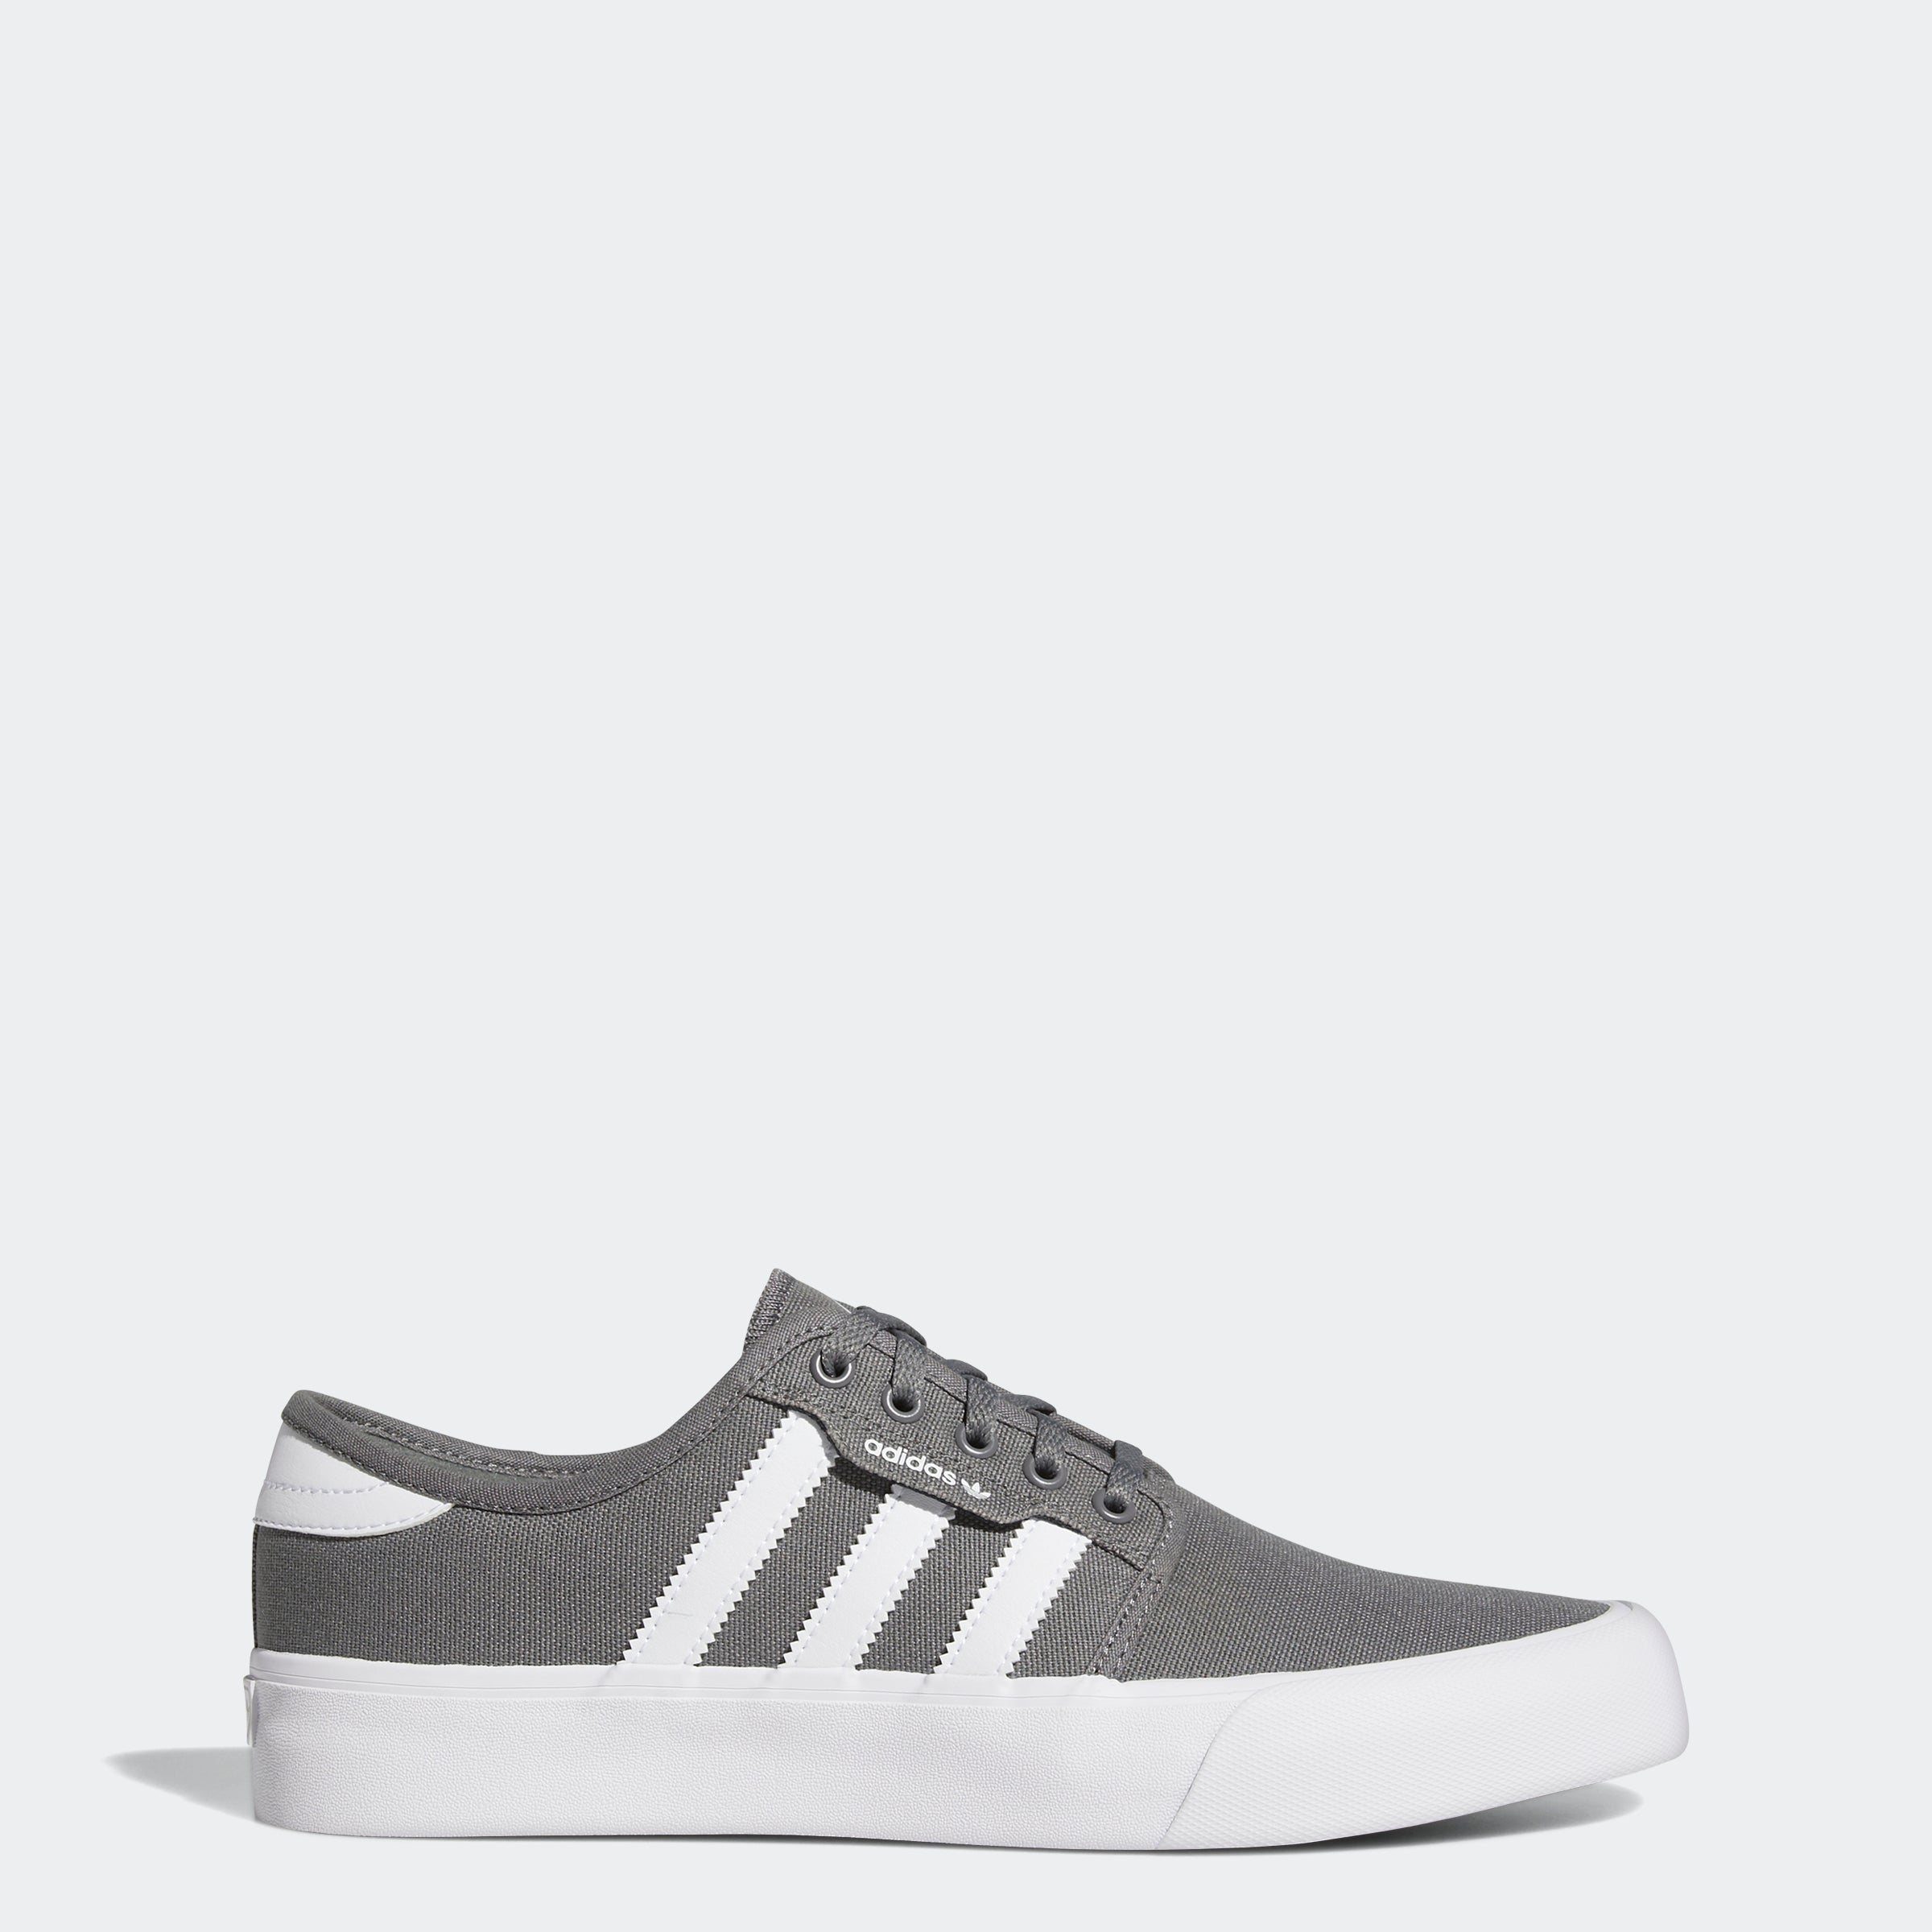 Men's adidas Seeley XT Shoes Grey White | Chicago Sports